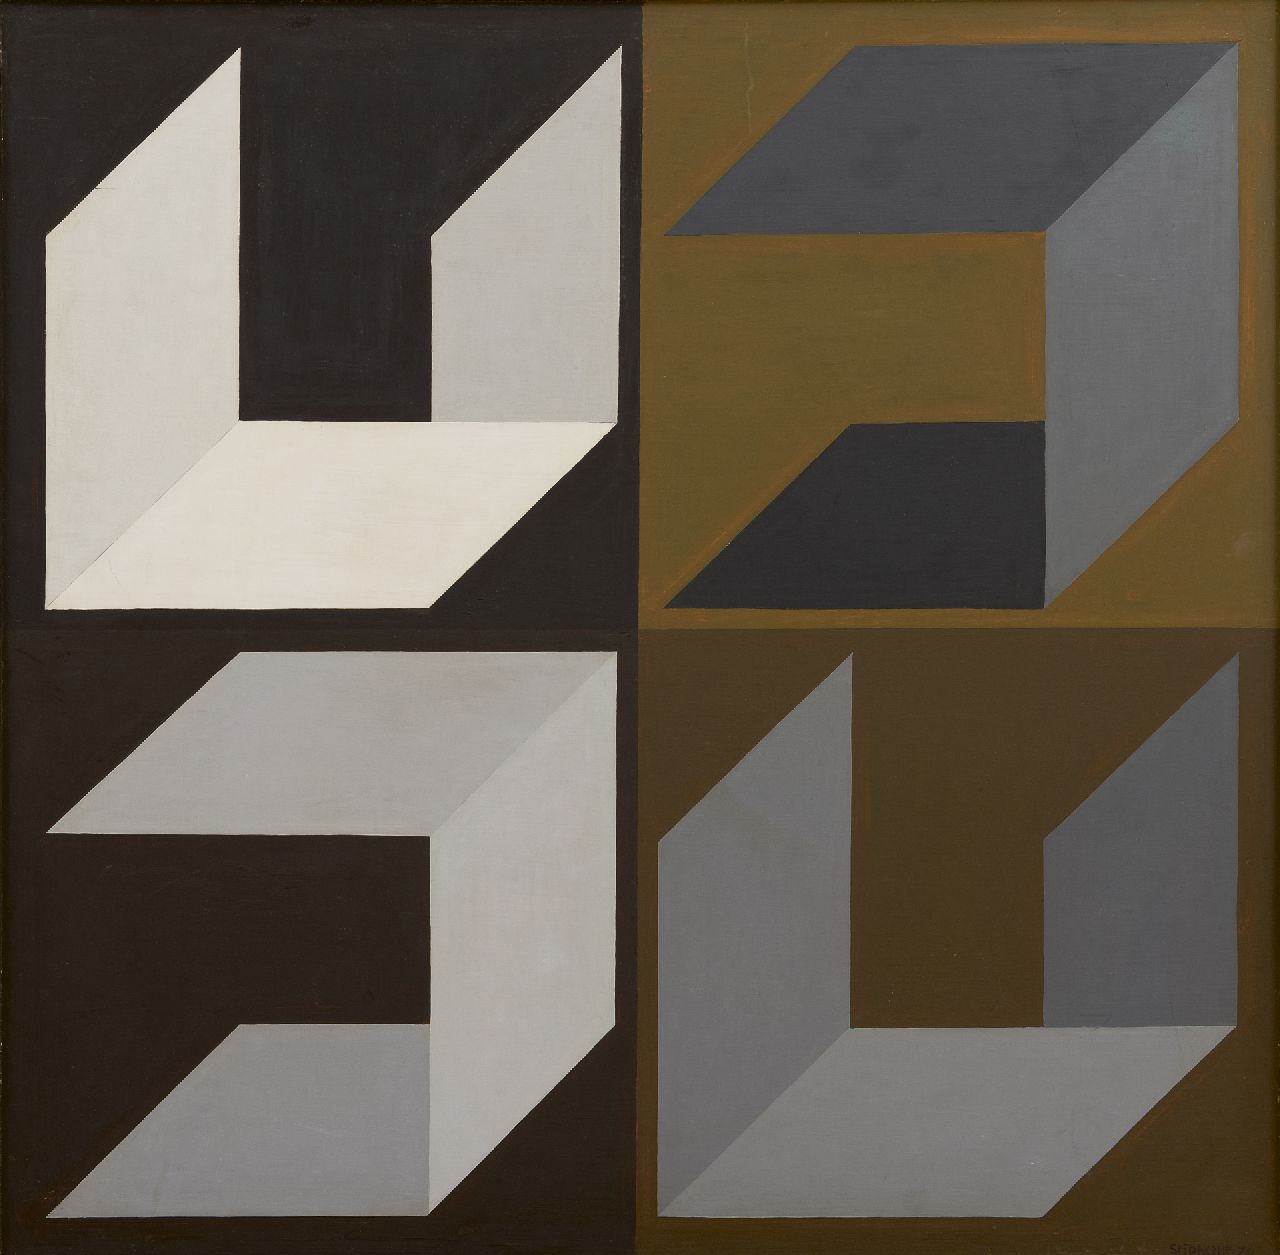 Stiphout T.G.W.  | Theodorus Gerardus Wilhelmus 'Theo' Stiphout, Composition III, oil on painter's board 59.5 x 59.6 cm, signed l.r. and painted '74